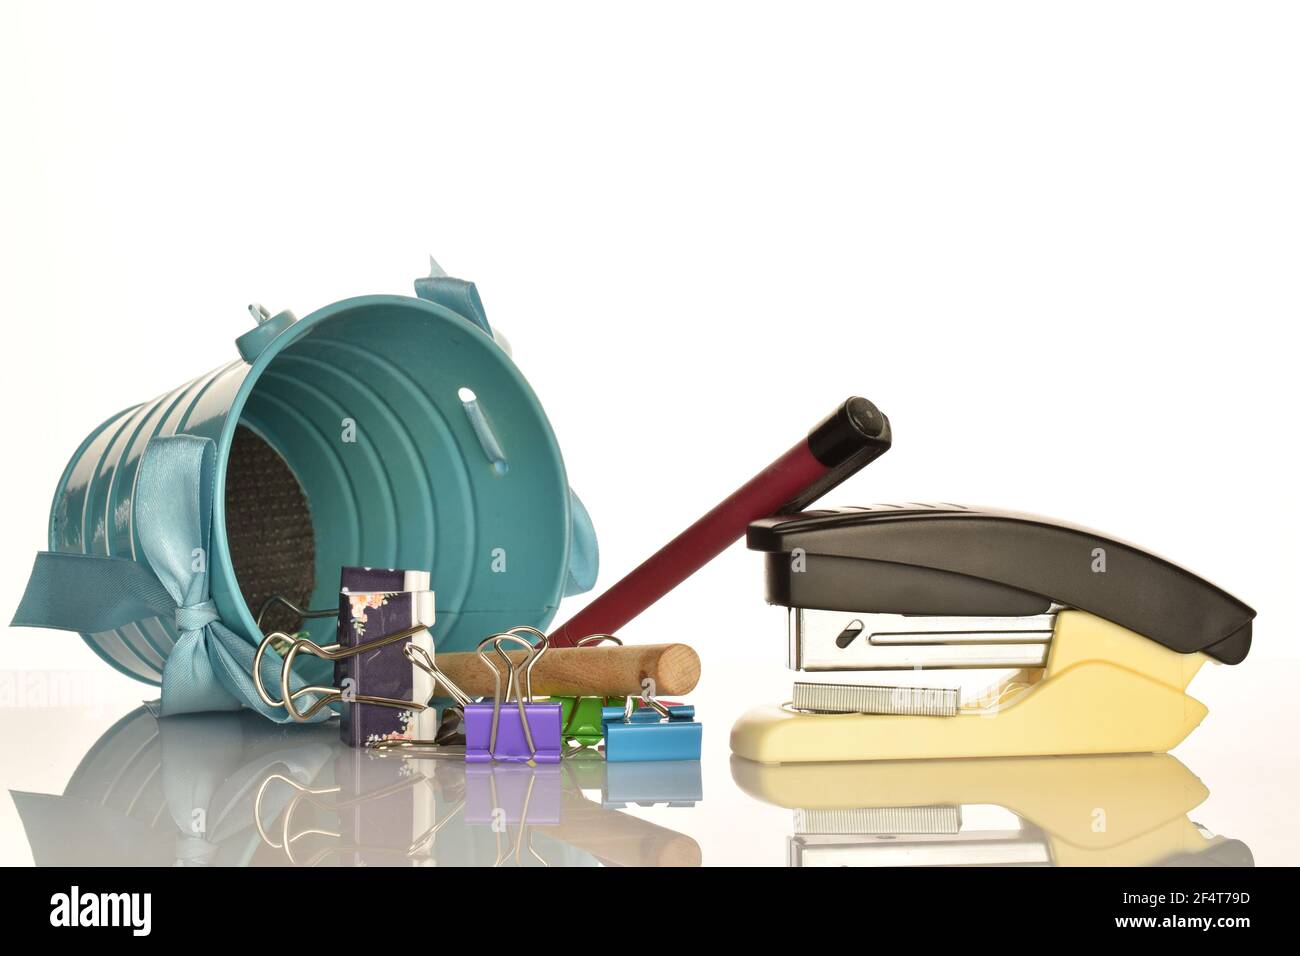 One stationery stapler, several blinders, two pens and a decorative metal bucket on a white background. Stock Photo